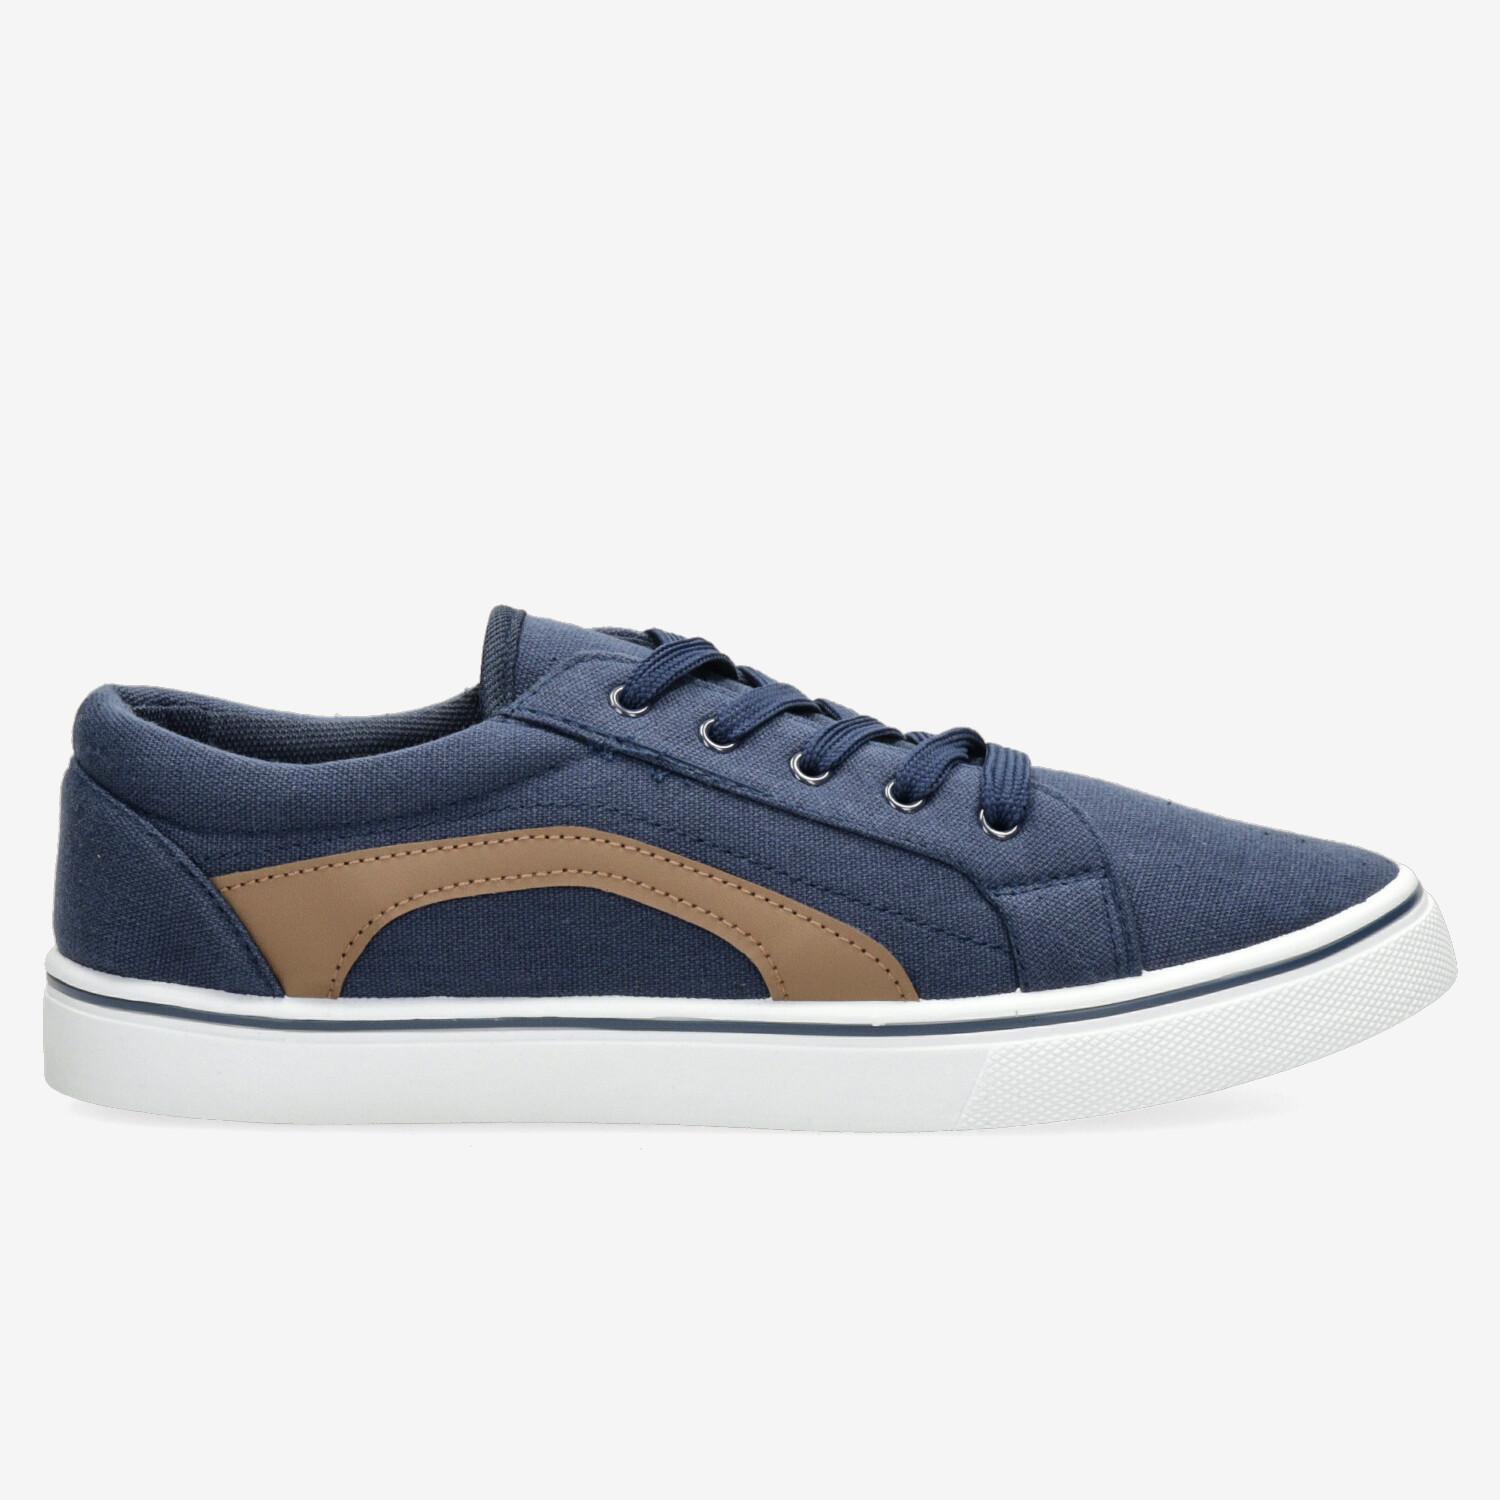 Up Noel - Bleu Marine - Chaussures en toile Homme sports taille 46